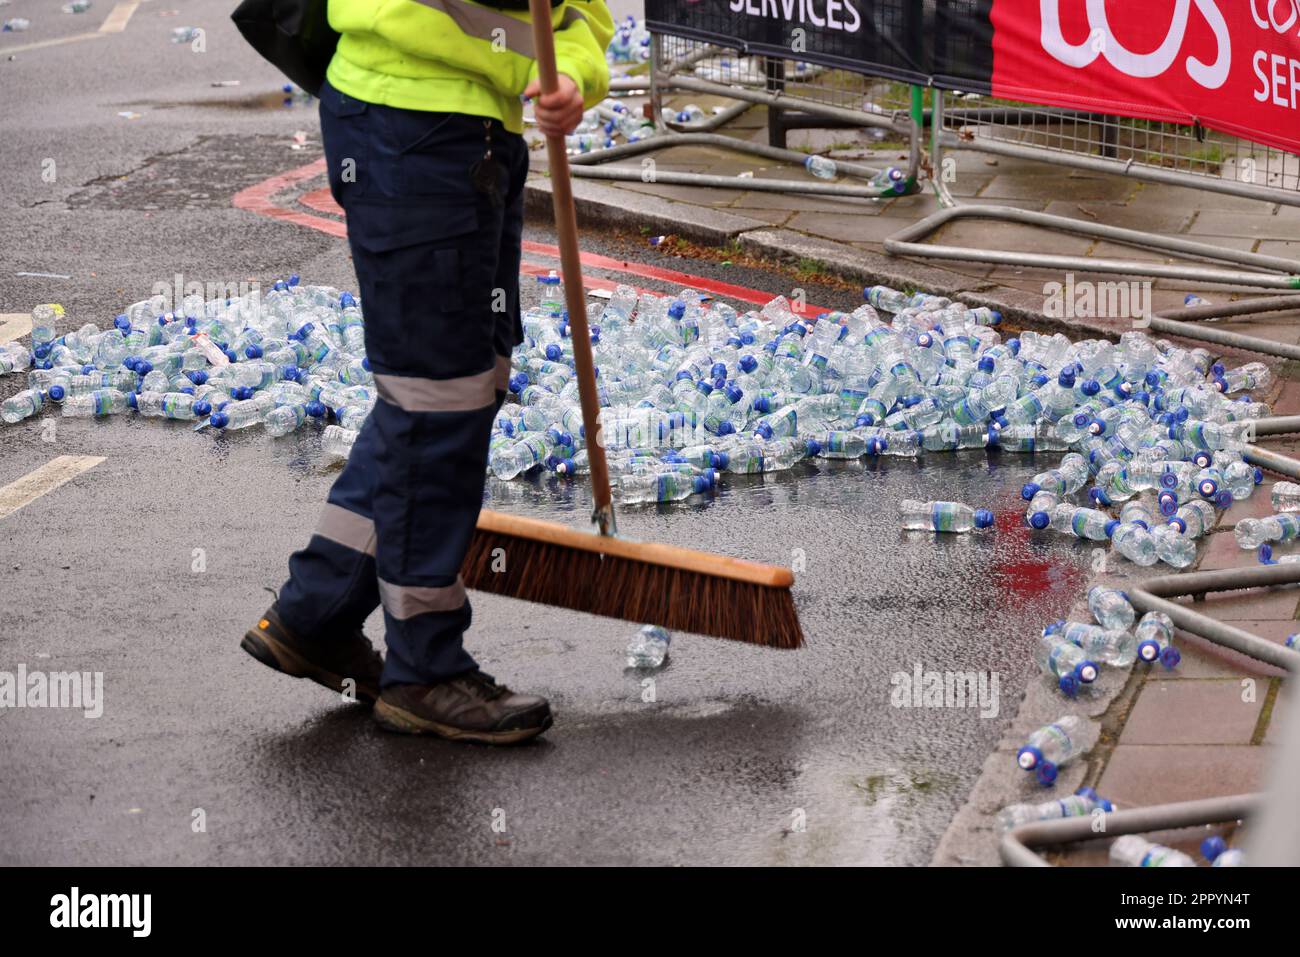 Pic shows London Marathon 2023 clear up after the last runners  Thousands of recycled plastic bottles were cleared up supplied by Buxton  They claim t Stock Photo